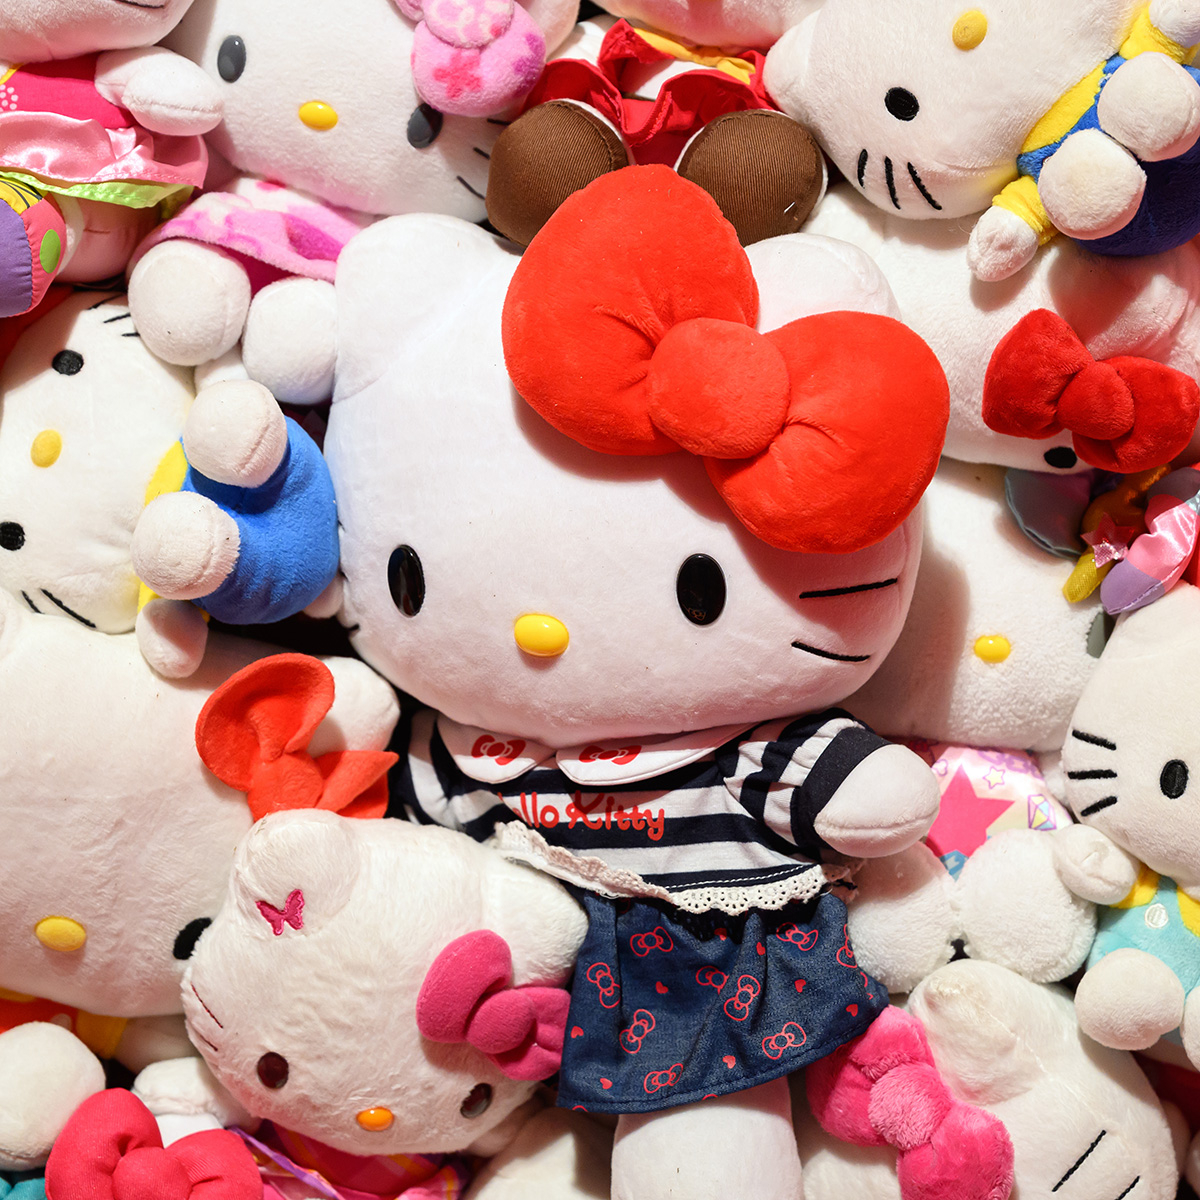 Did You Know Hello Kitty Isn’t Even Her Real Name? 